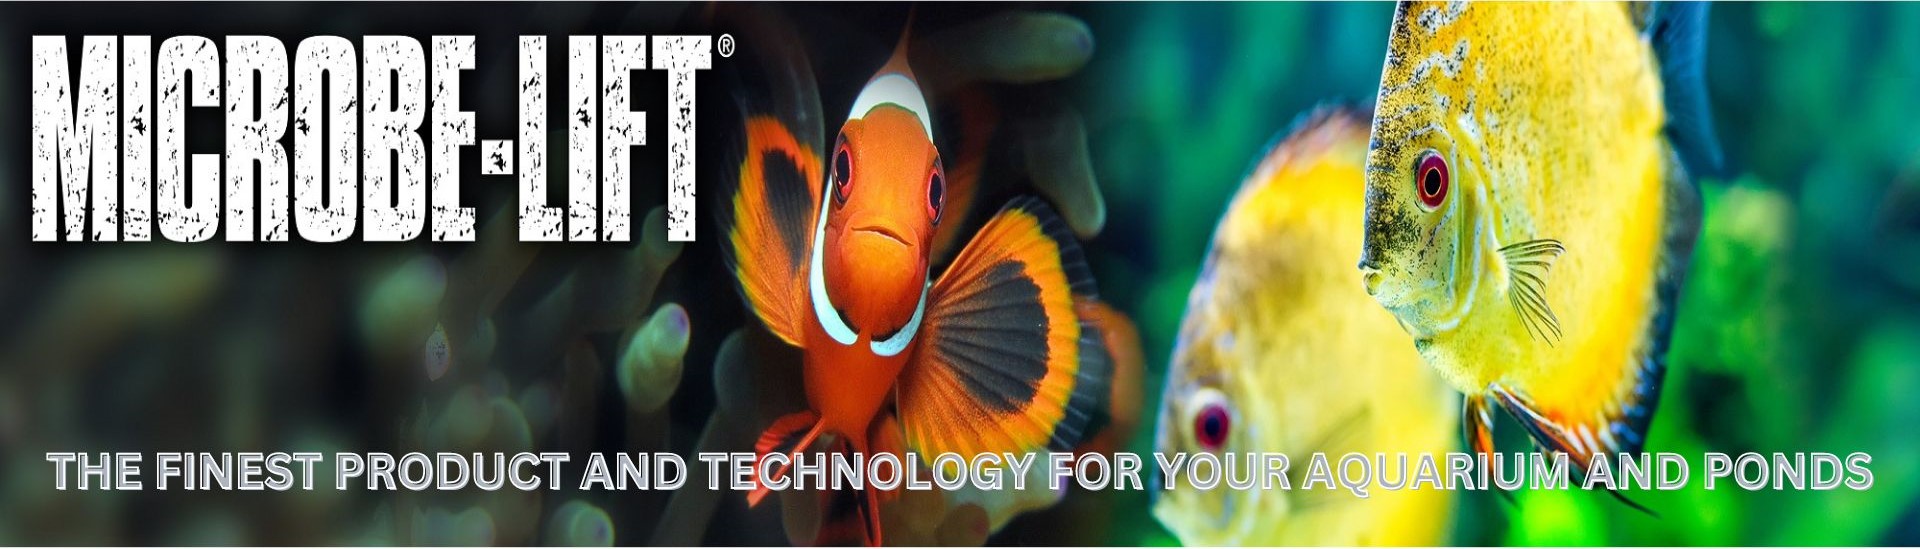 THE FINEST PRODUCT AND TECHNOLOGY FOR YOUR AQUARIUM AND PONDS - 1